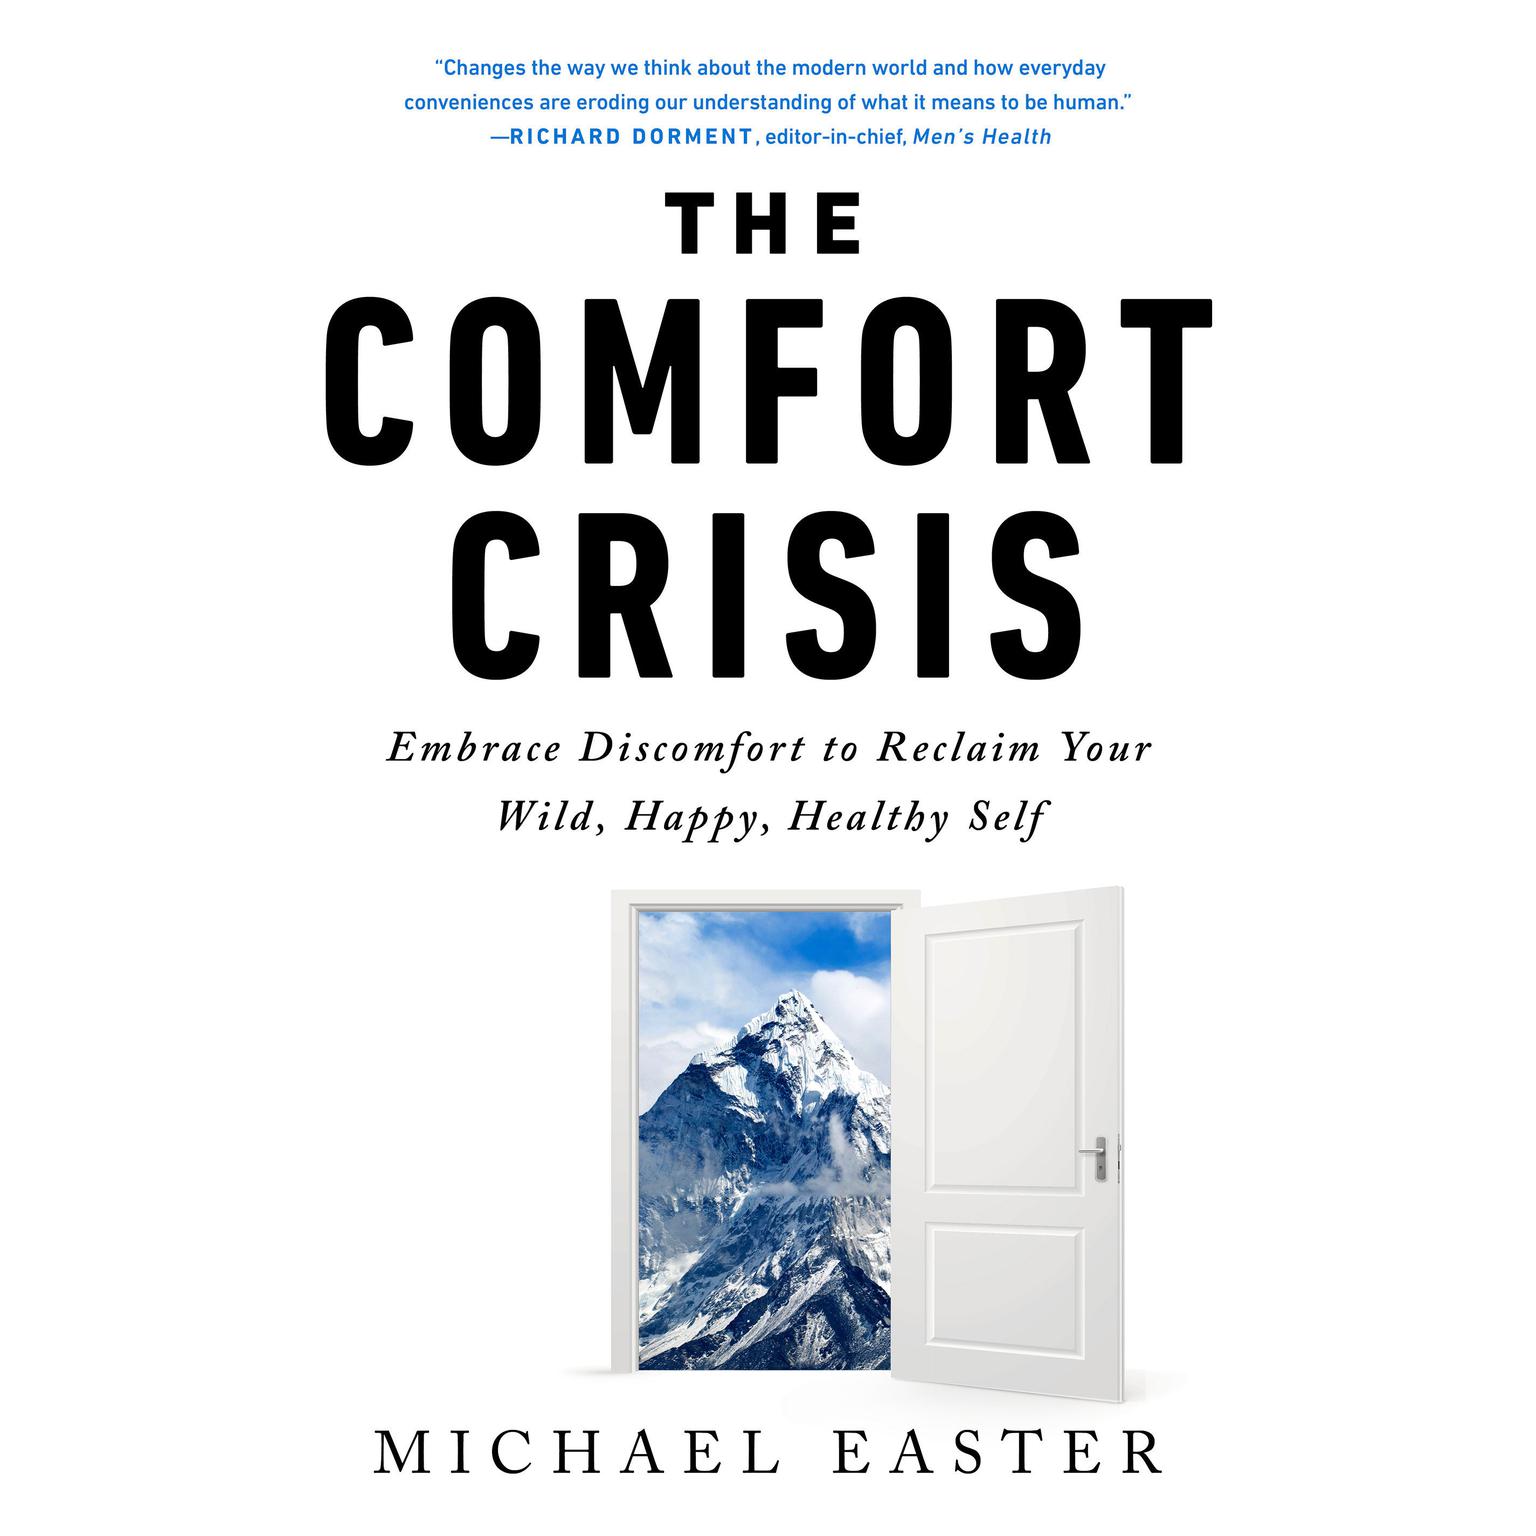 The Comfort Crisis: Embrace Discomfort To Reclaim Your Wild, Happy, Healthy Self Audiobook, by Michael Easter